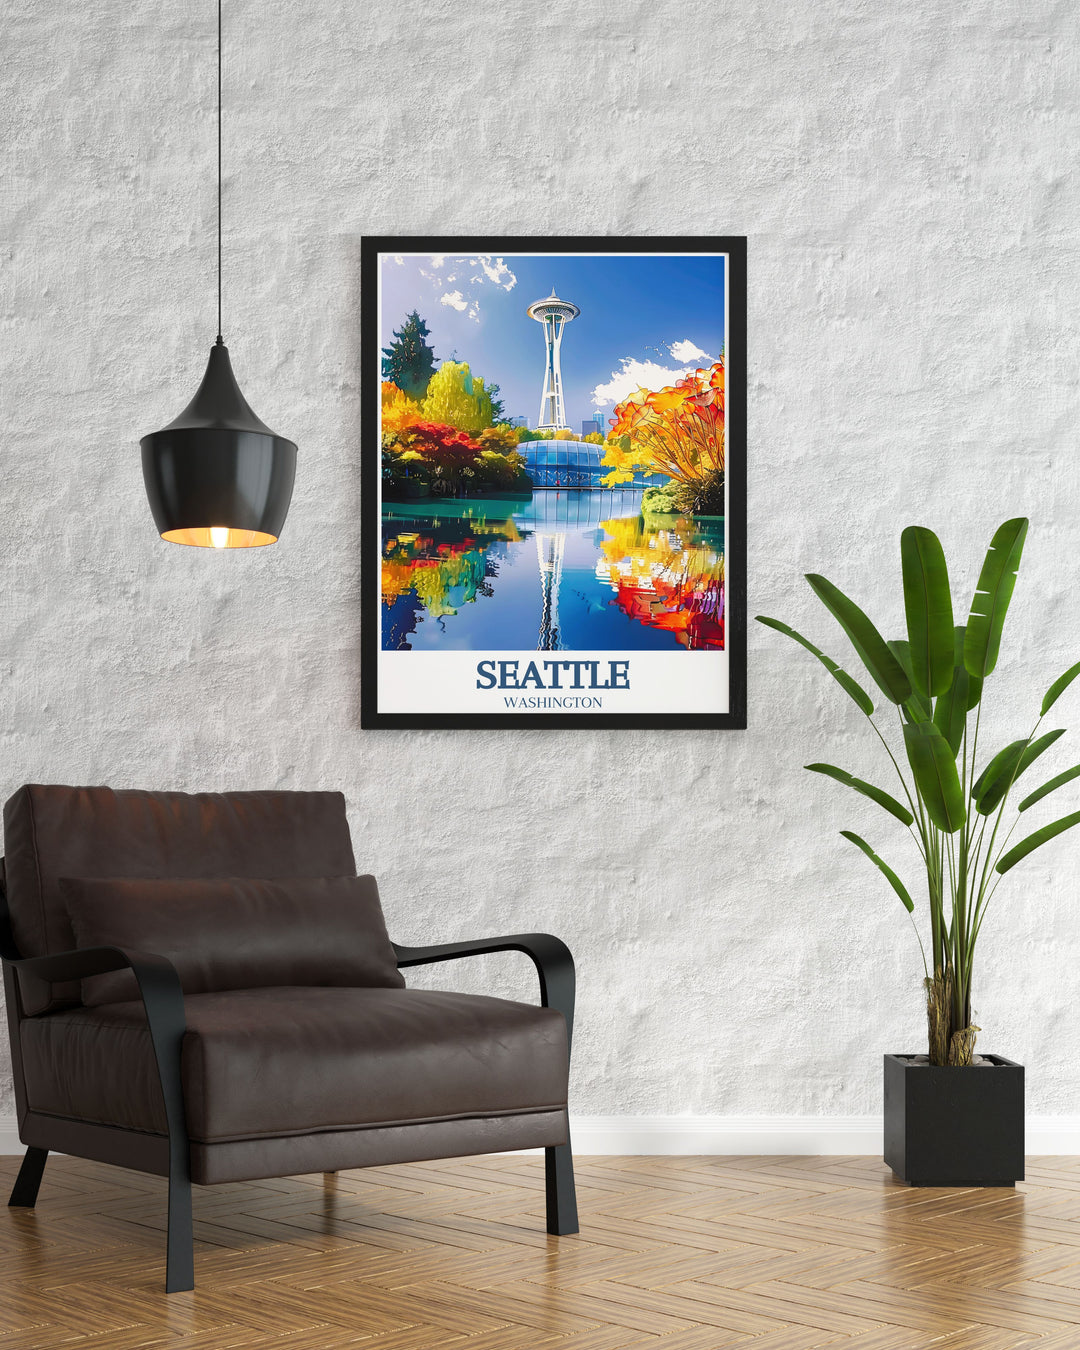 Experience the thrill of skiing at the Summit at Snoqualmie and the artistic marvels of Chihuly Garden with this detailed poster, highlighting the scenic beauty of Seattle and its renowned landmarks, ideal for any ski resort themed home decor.